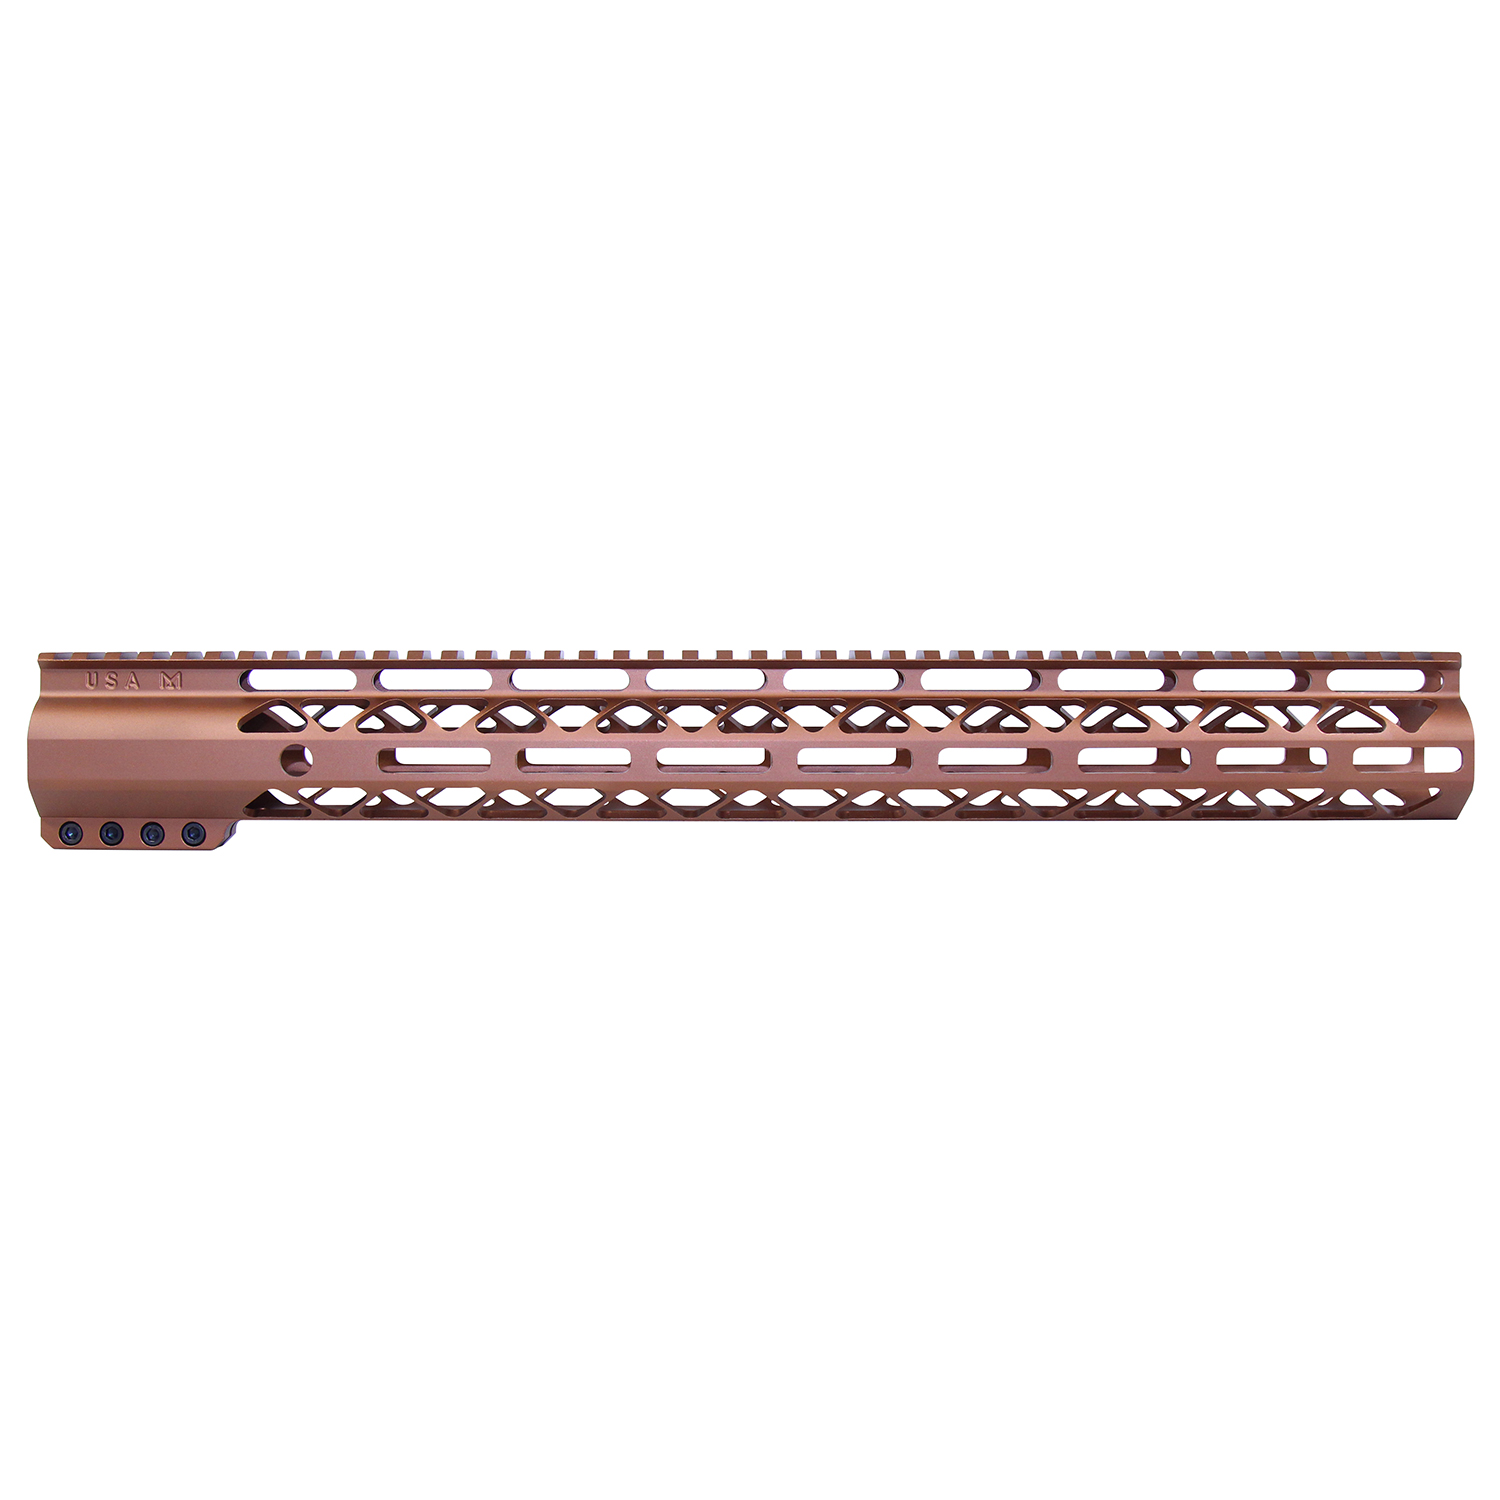 16.5" AIR-LOK Series M-LOK Compression Free Floating Handguard With Monolithic Top Rail (Anodized Bronze)